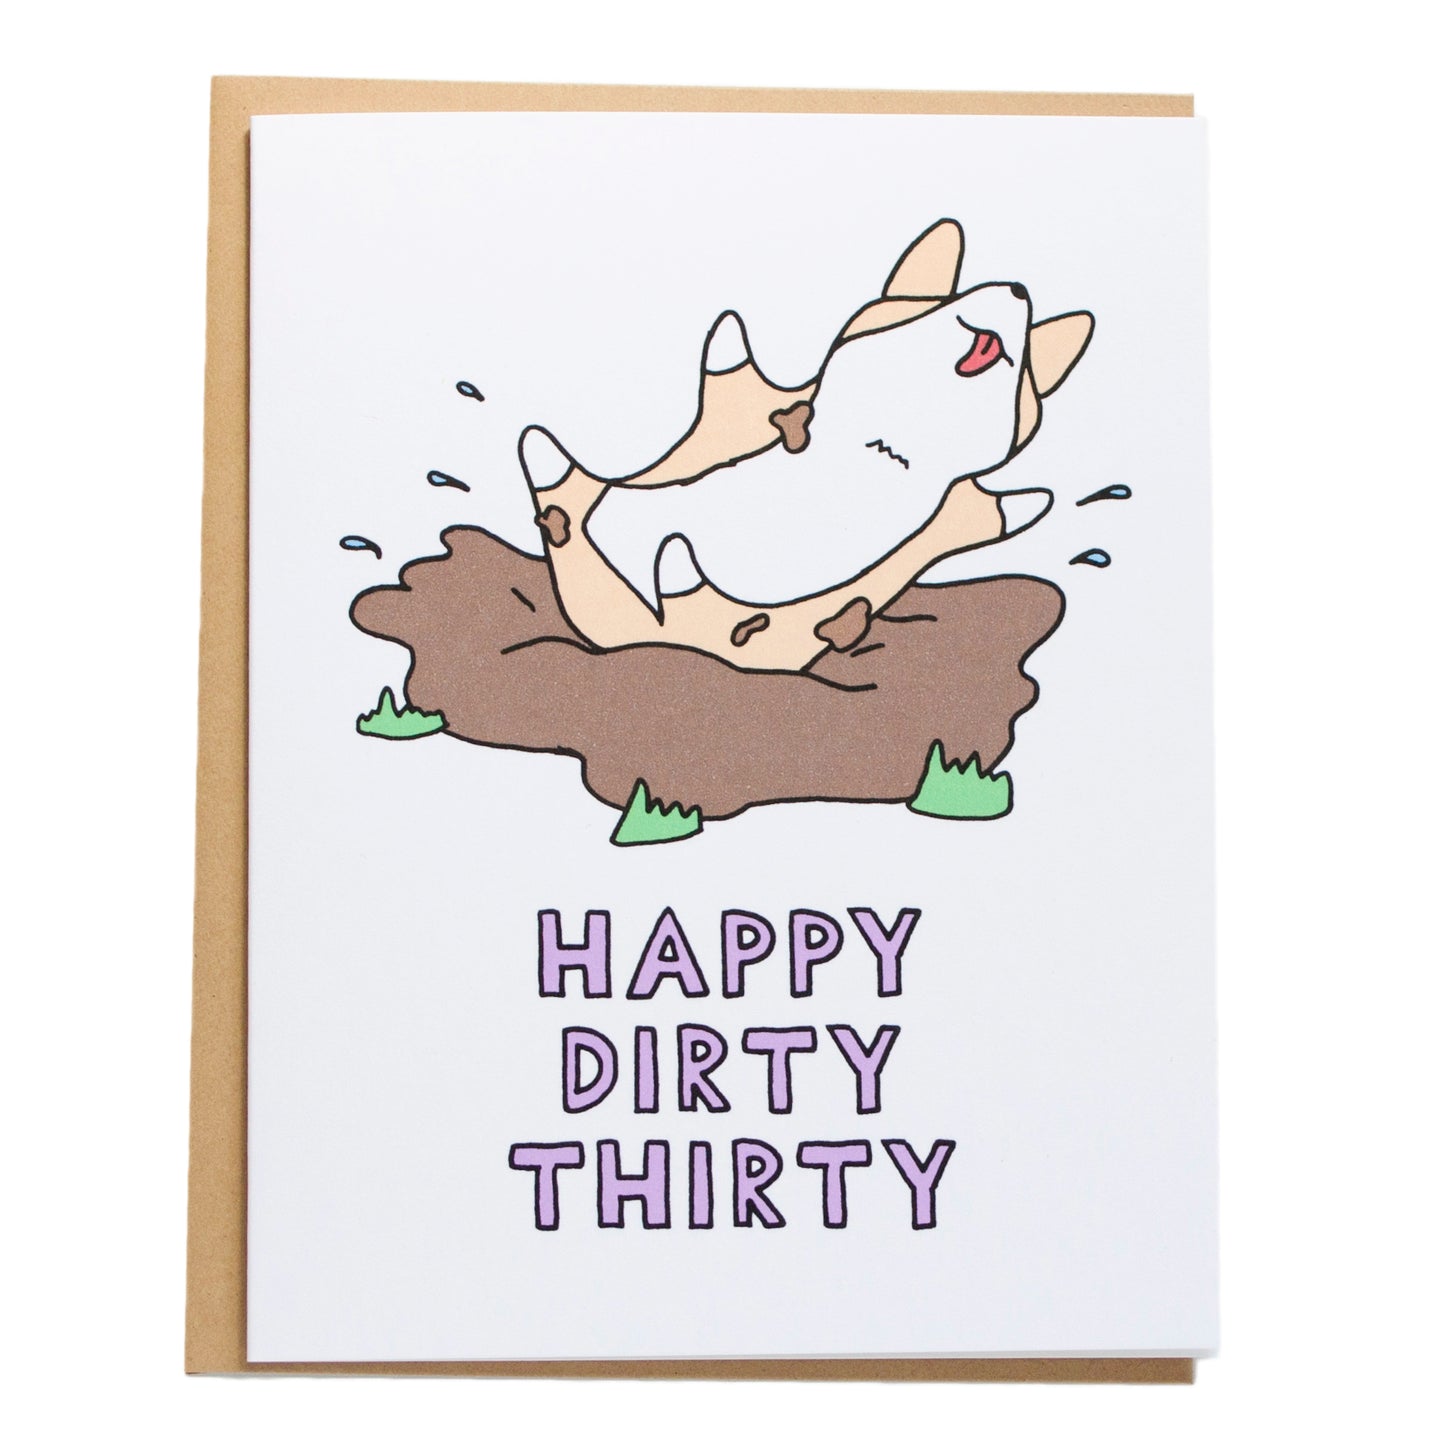 corgi playing in mud. card reads: happy dirty thirty